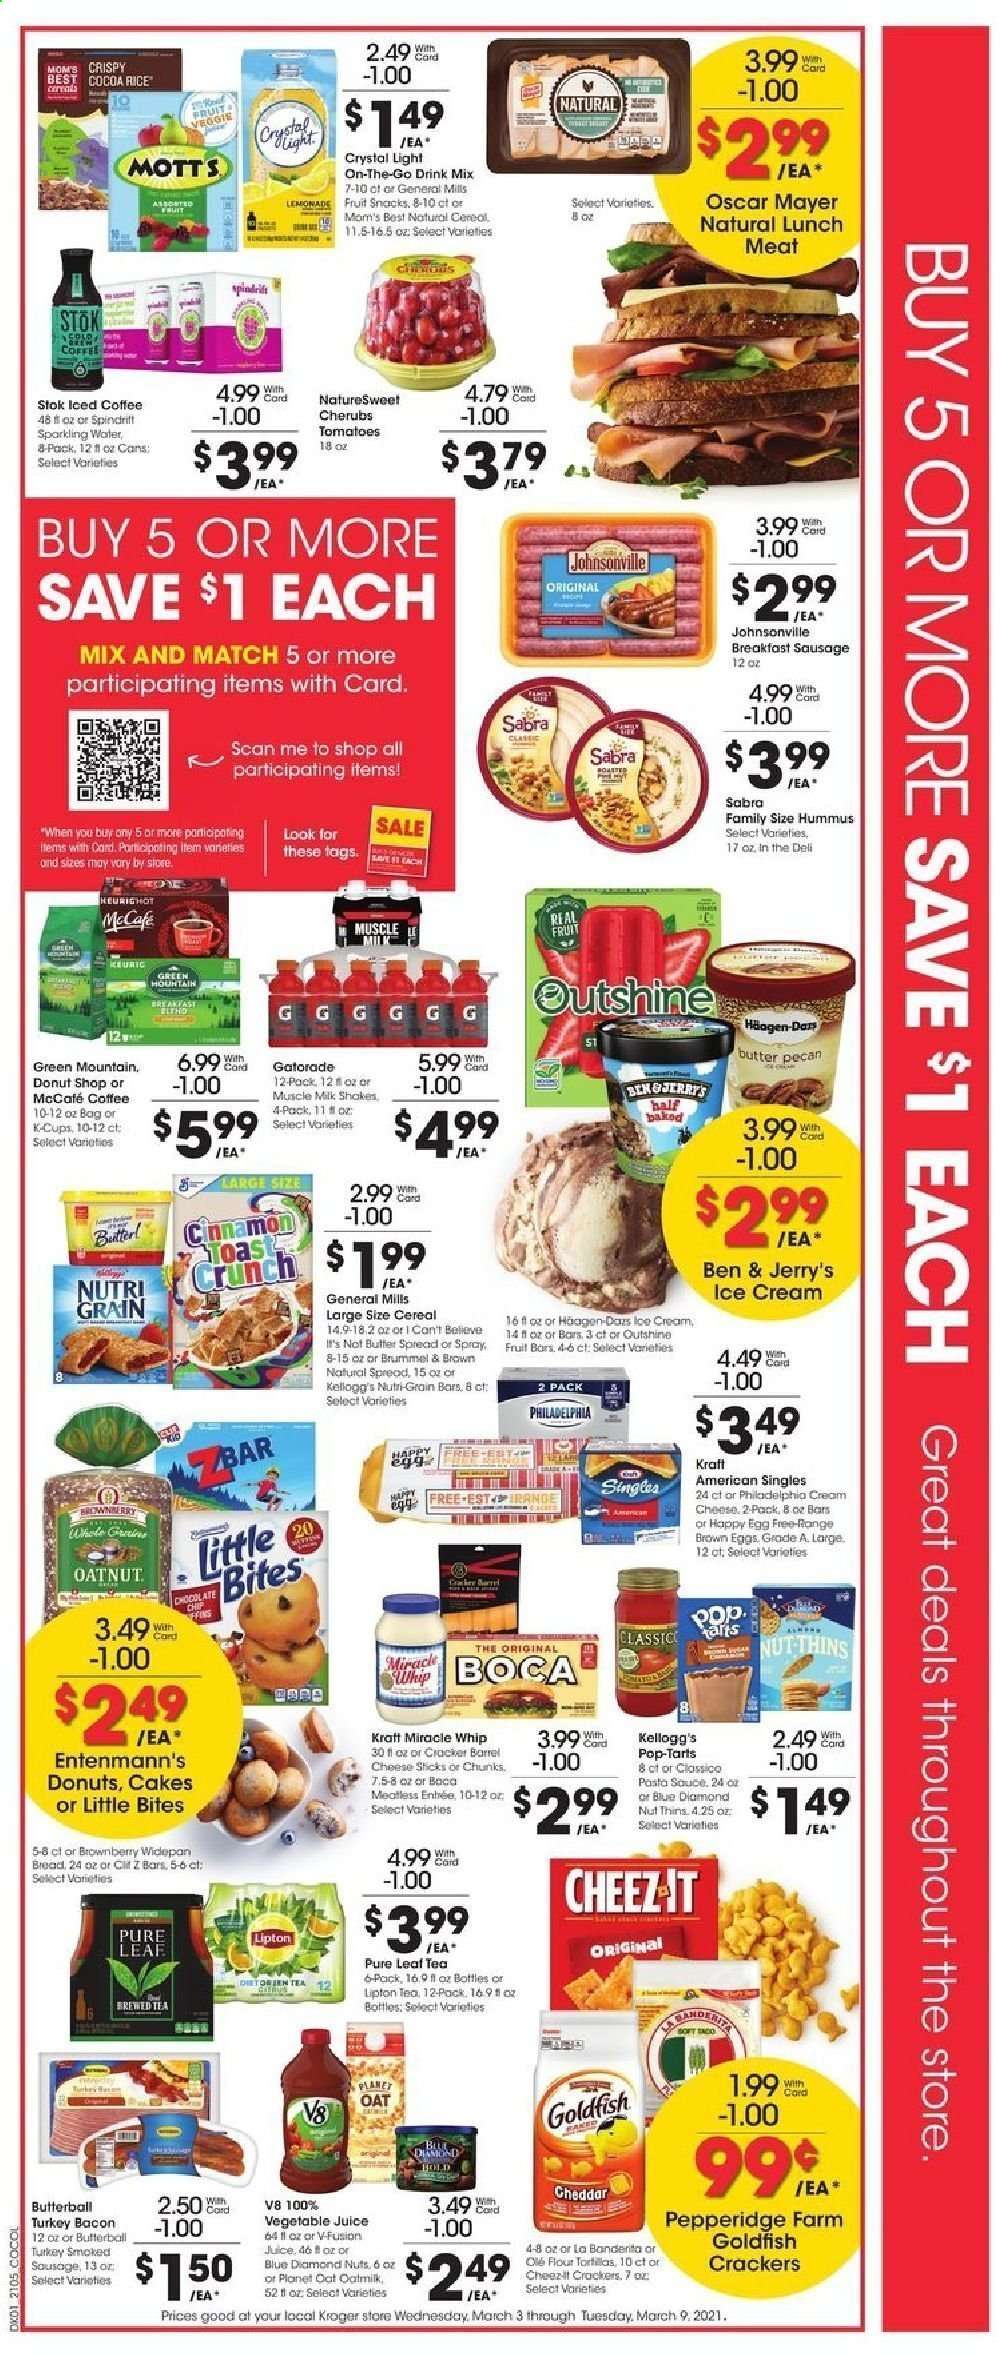 thumbnail - Kroger Flyer - 03/03/2021 - 03/09/2021 - Sales products - bread, tortillas, Johnsonville, cake, Entenmann's, Little Bites, cream cheese, Kraft®, bacon, turkey bacon, Oscar Mayer, sausage, smoked sausage, hummus, lunch meat, Philadelphia, cheddar, cheese, Kraft Singles, milk, shake, muscle milk, eggs, Miracle Whip, ice cream, Ben & Jerry's, crackers, Kellogg's, Pop-Tarts, fruit snack, Thins, Goldfish, oats, cereals, Mom's Best, cocoa rice, Nutri-Grain, pasta sauce, Blue Diamond, lemonade, juice, Lipton, vegetable juice, Mott's, Spindrift, Gatorade, sparkling water, iced coffee, tea, Pure Leaf, coffee capsules, McCafe, K-Cups, Green Mountain, Butterball. Page 2.